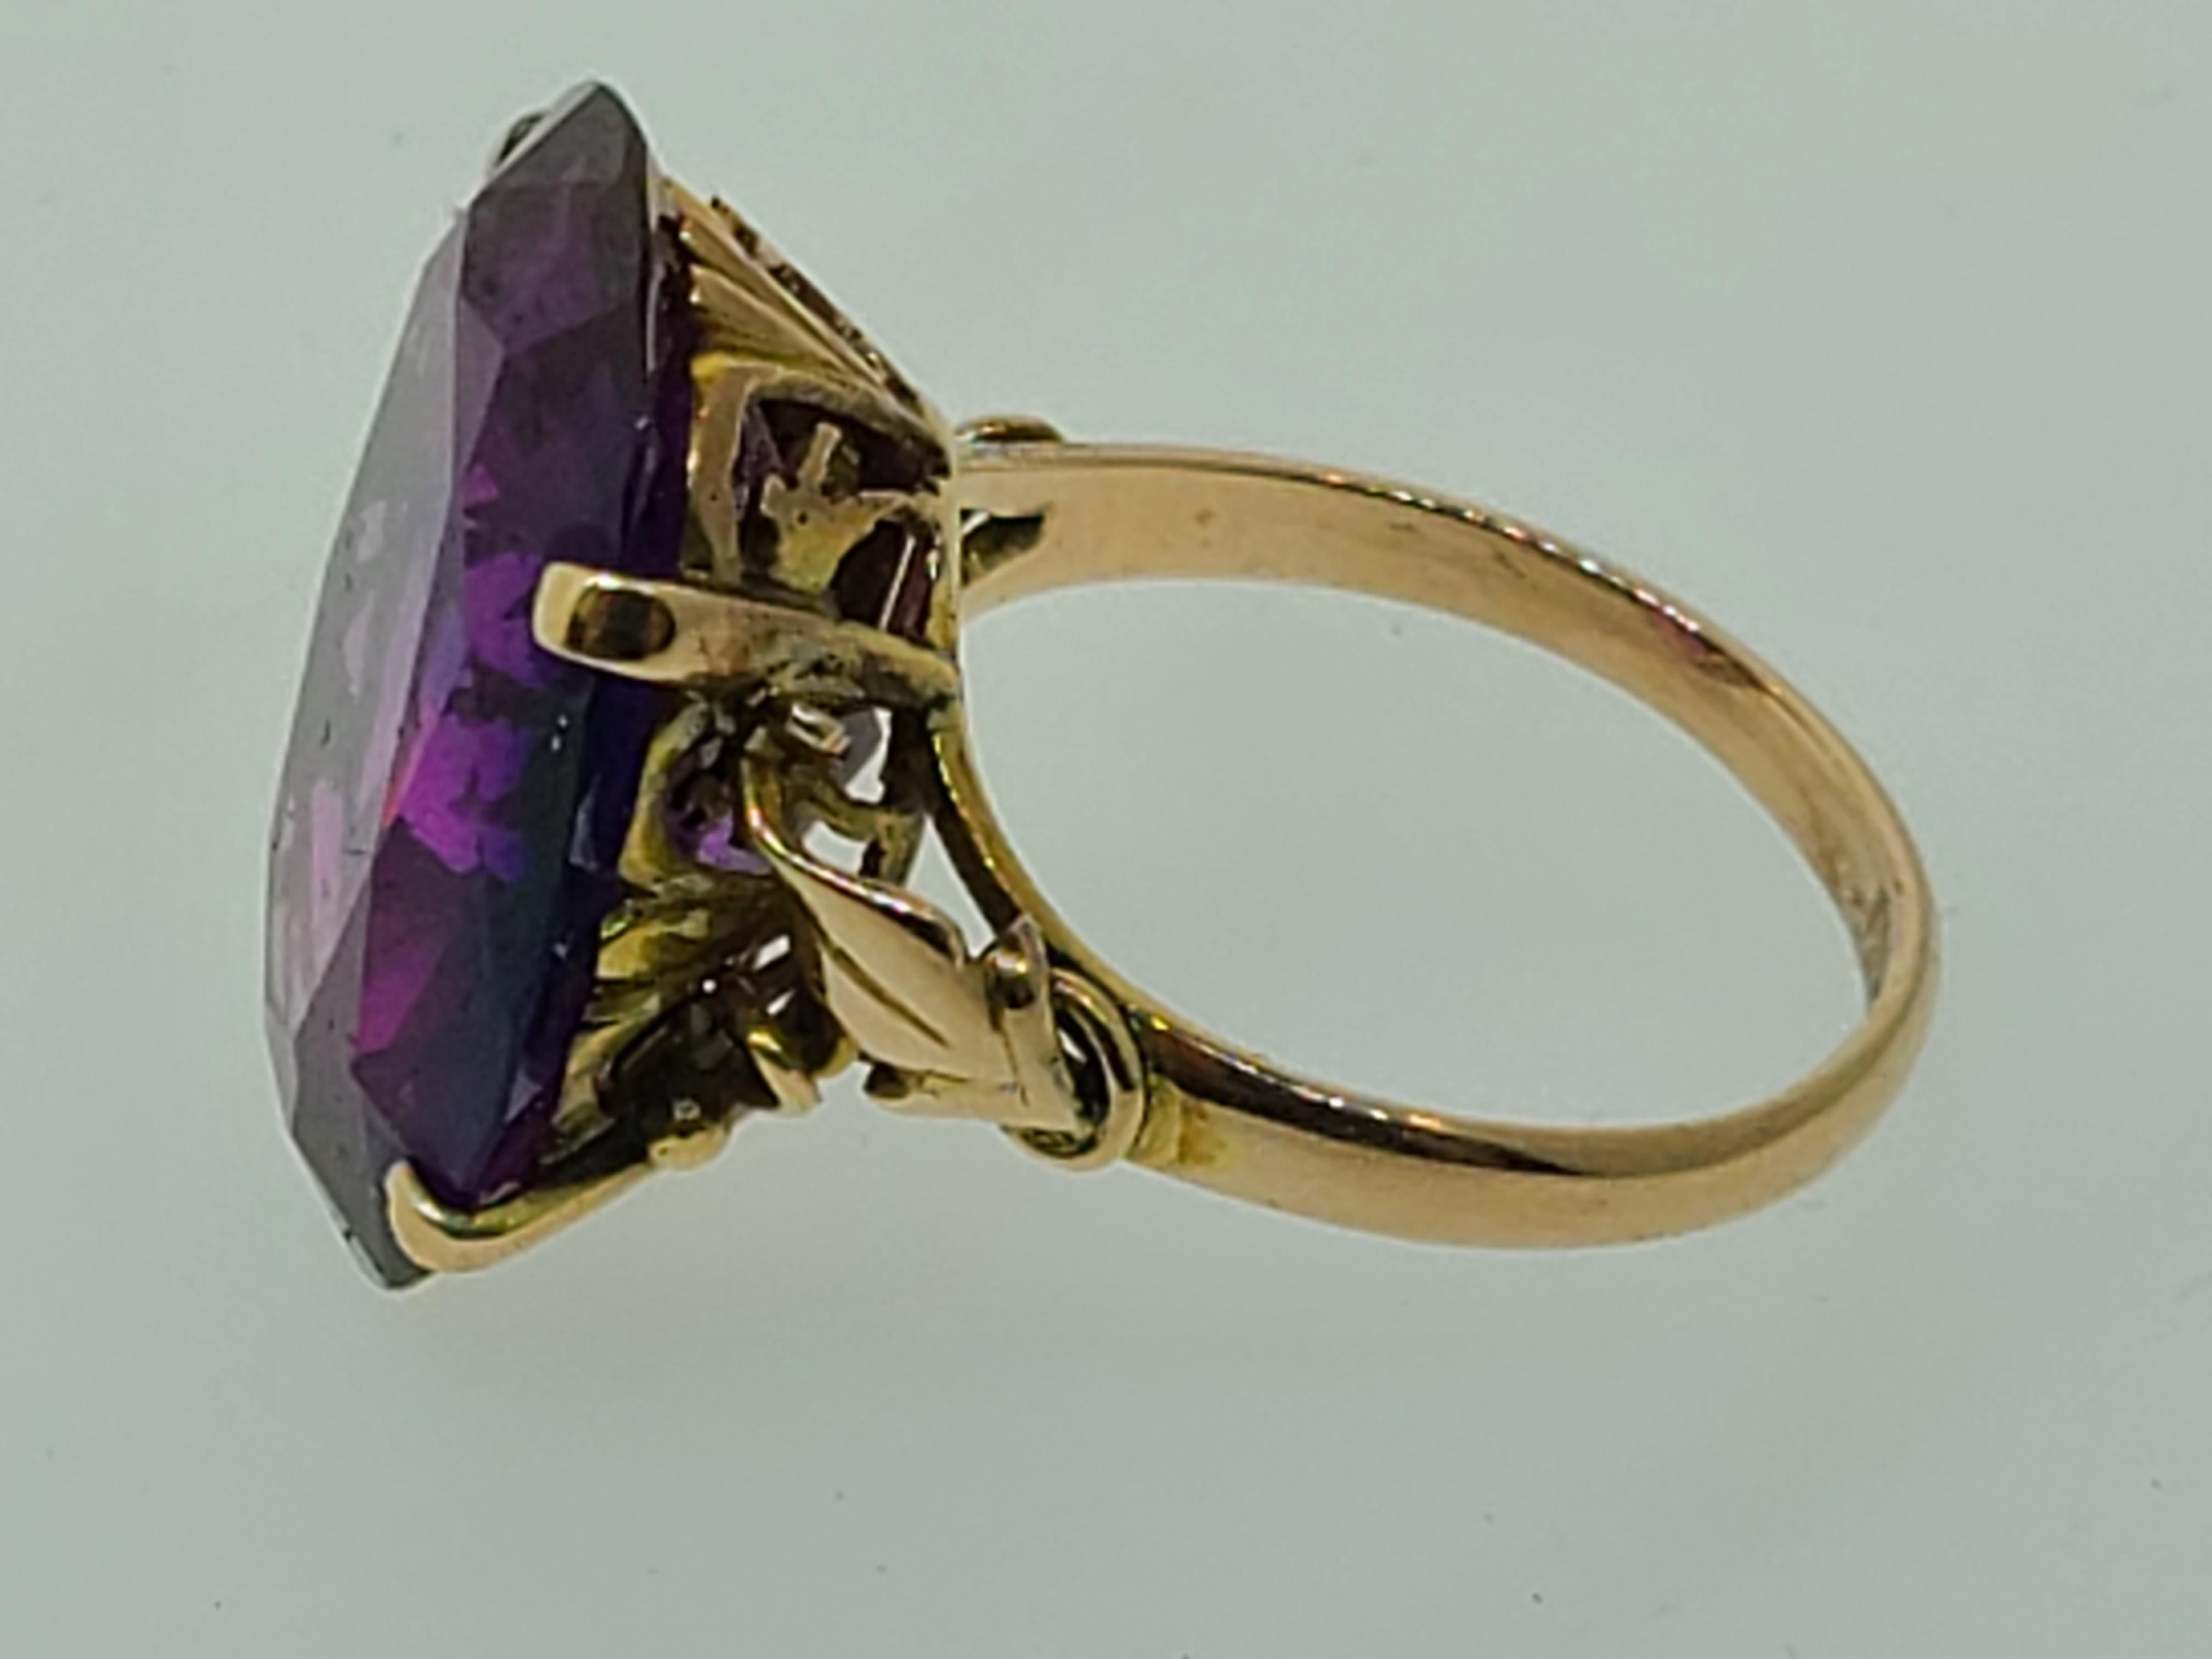 This gorgeous Art Deco era cocktail ring, circa 1930s, is crafted beautifully in a soft hue of 14K yellow gold. With a bold and beautiful, 20mm x 16mm, oval cut lab created Alexandrite as the centerpiece of this stunning ring is approximately 20ct